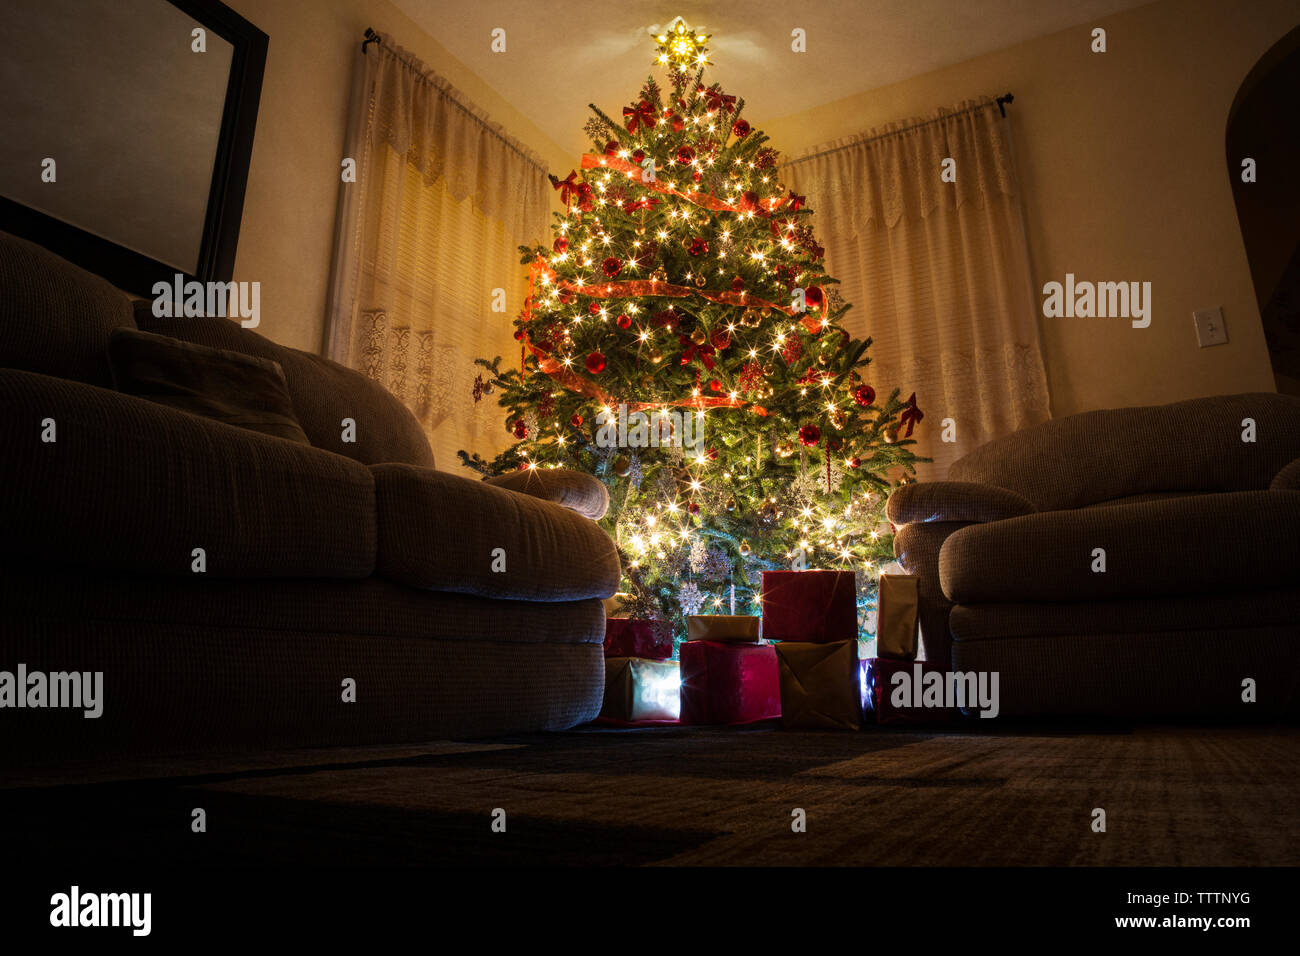 Low angel view of illuminated Christmas tree at home Stock Photo